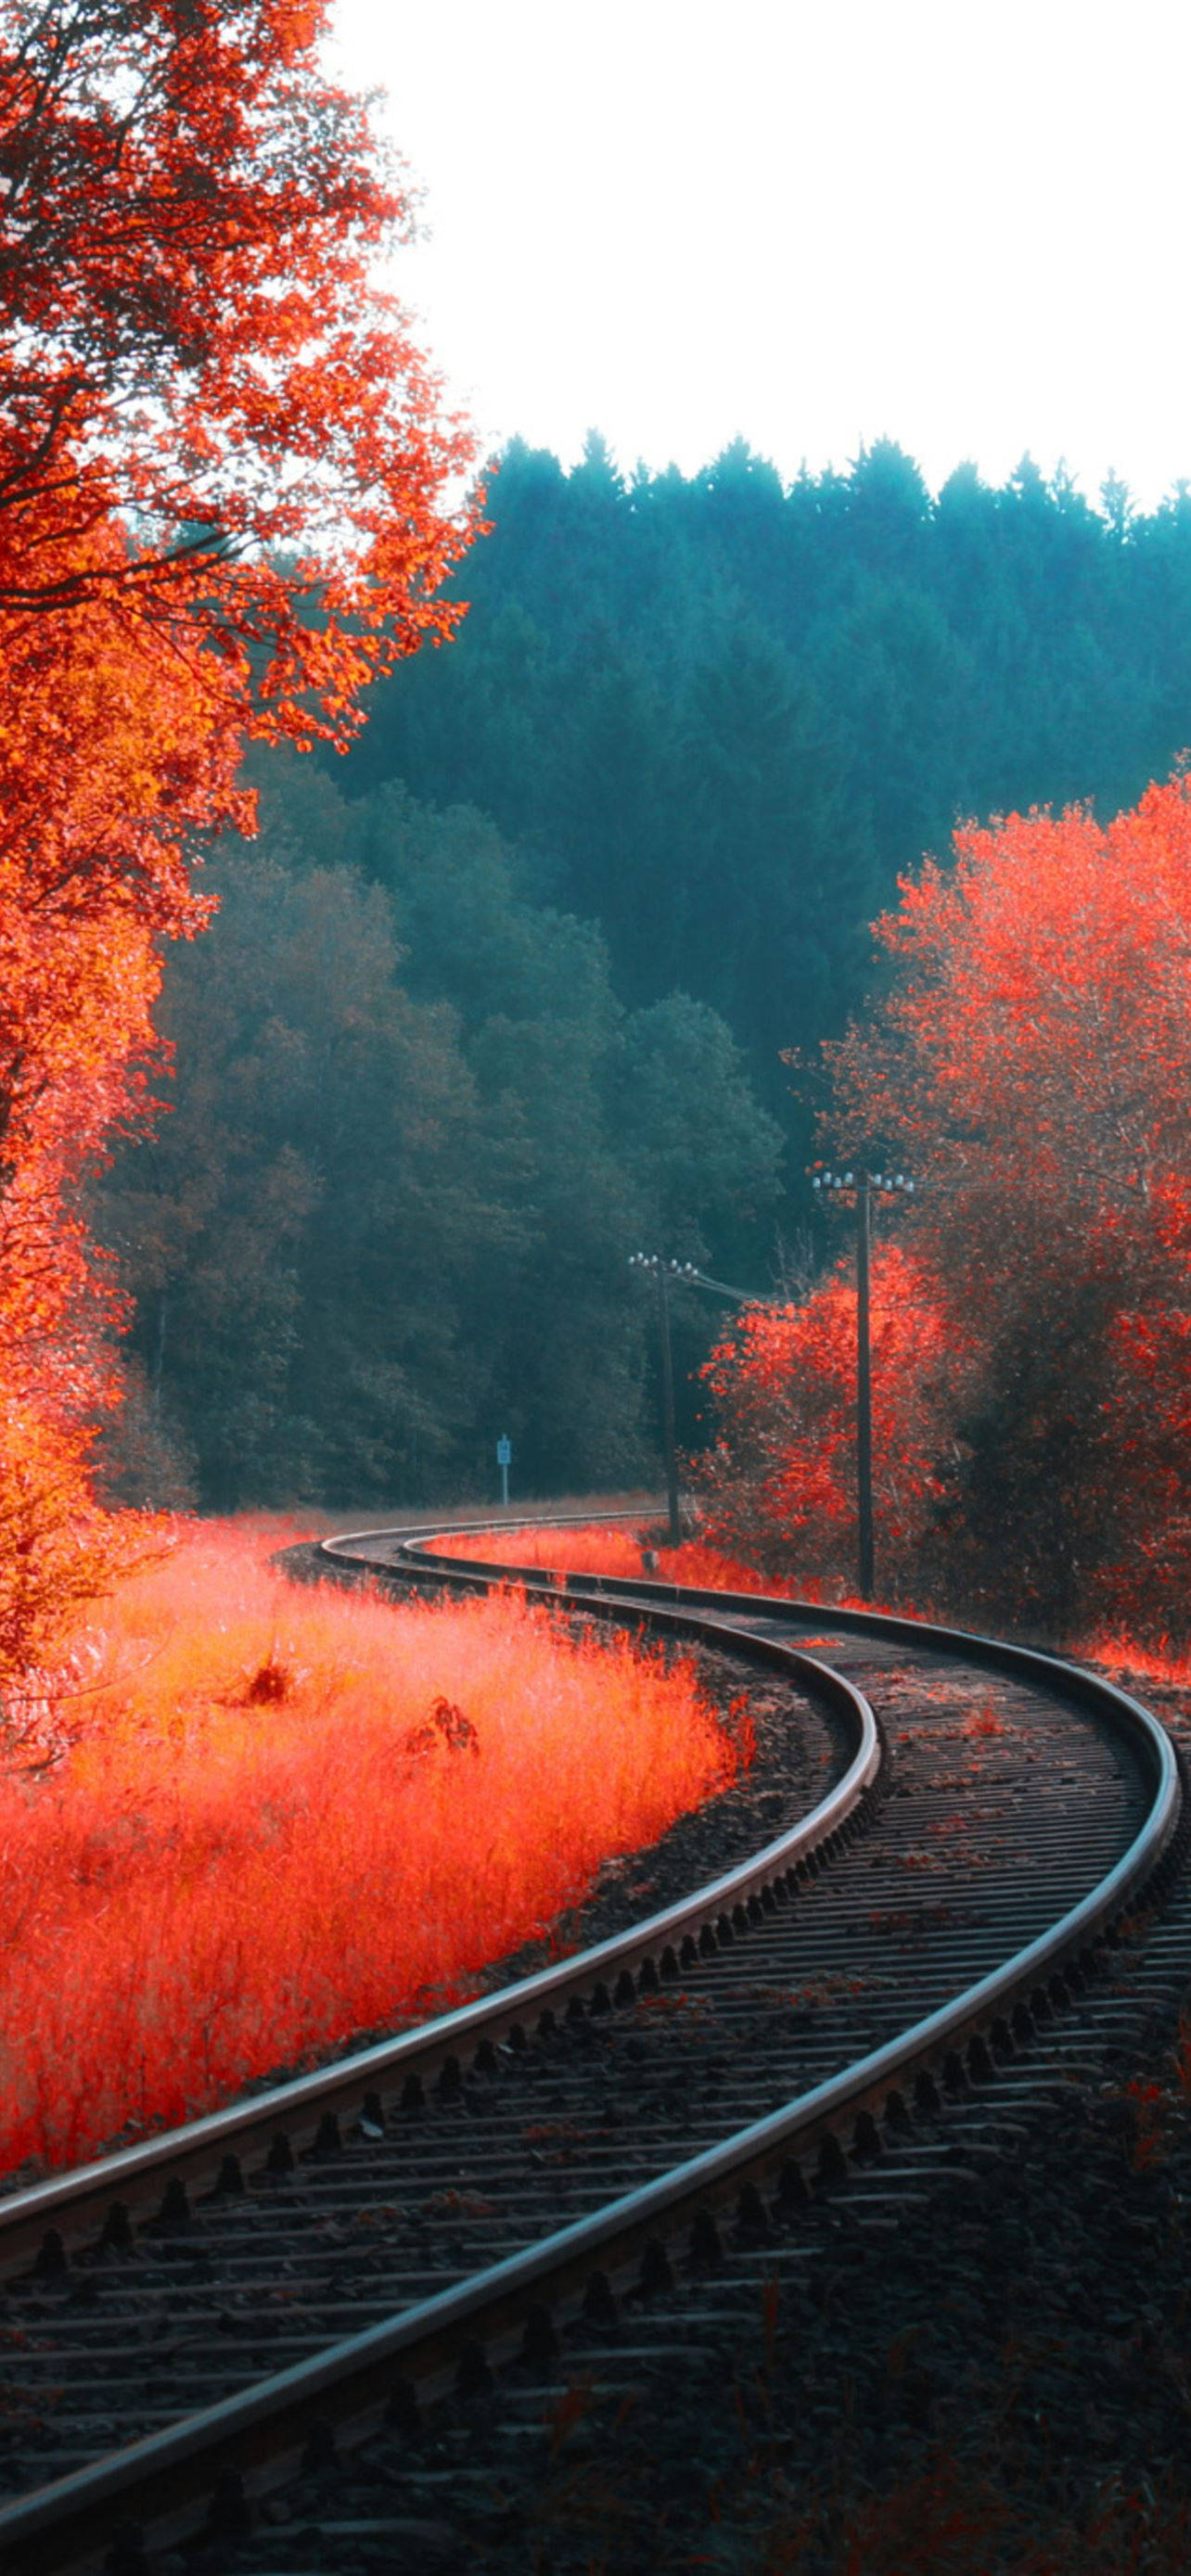 Download Autumn Iphone Forest Railway Track Wallpaper 